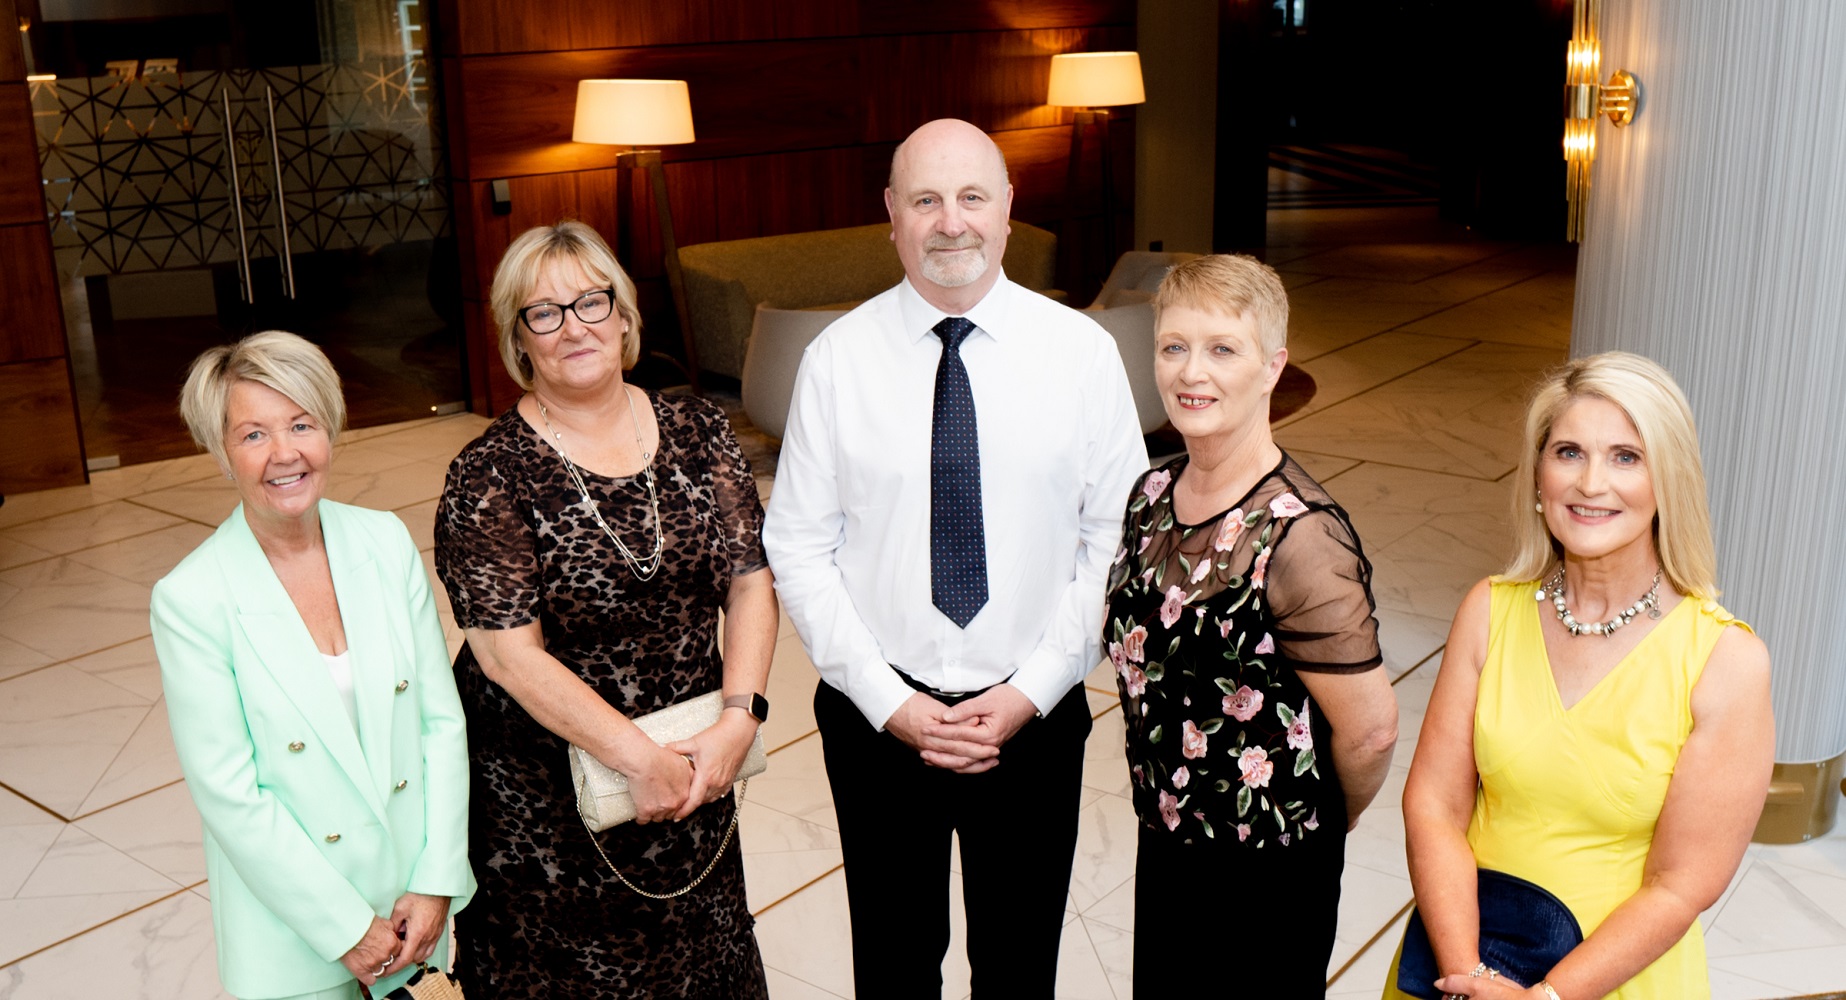 Moy Park employees celebrated at company’s Long Service Celebration event